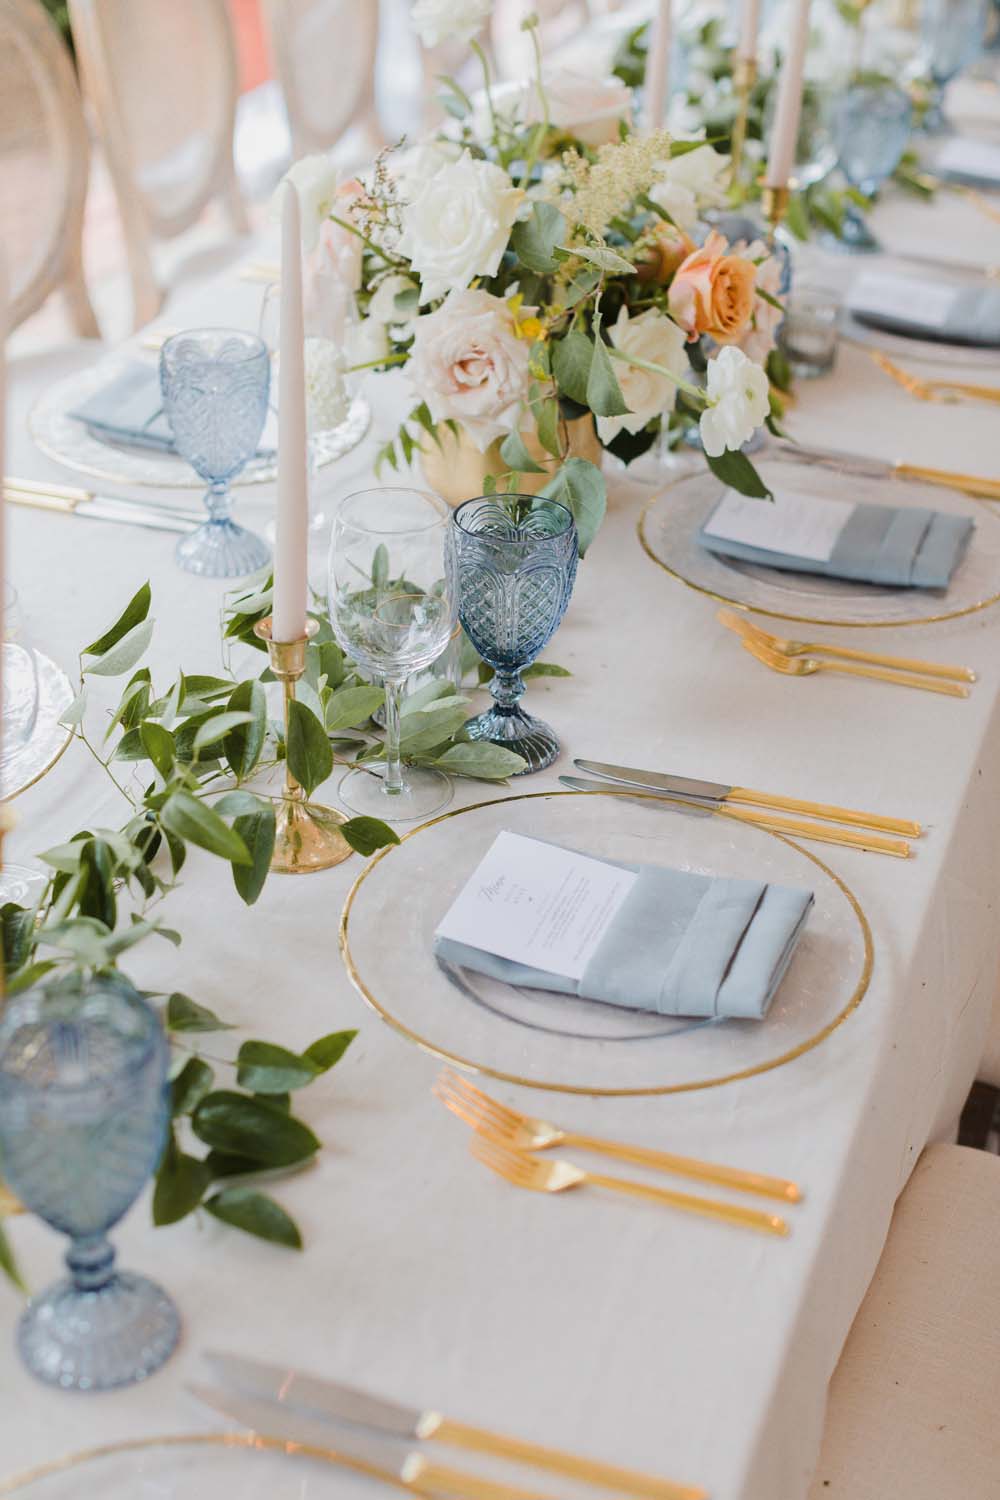 A Whimsical Wedding at Windmill Point, Ontario - Tablescape